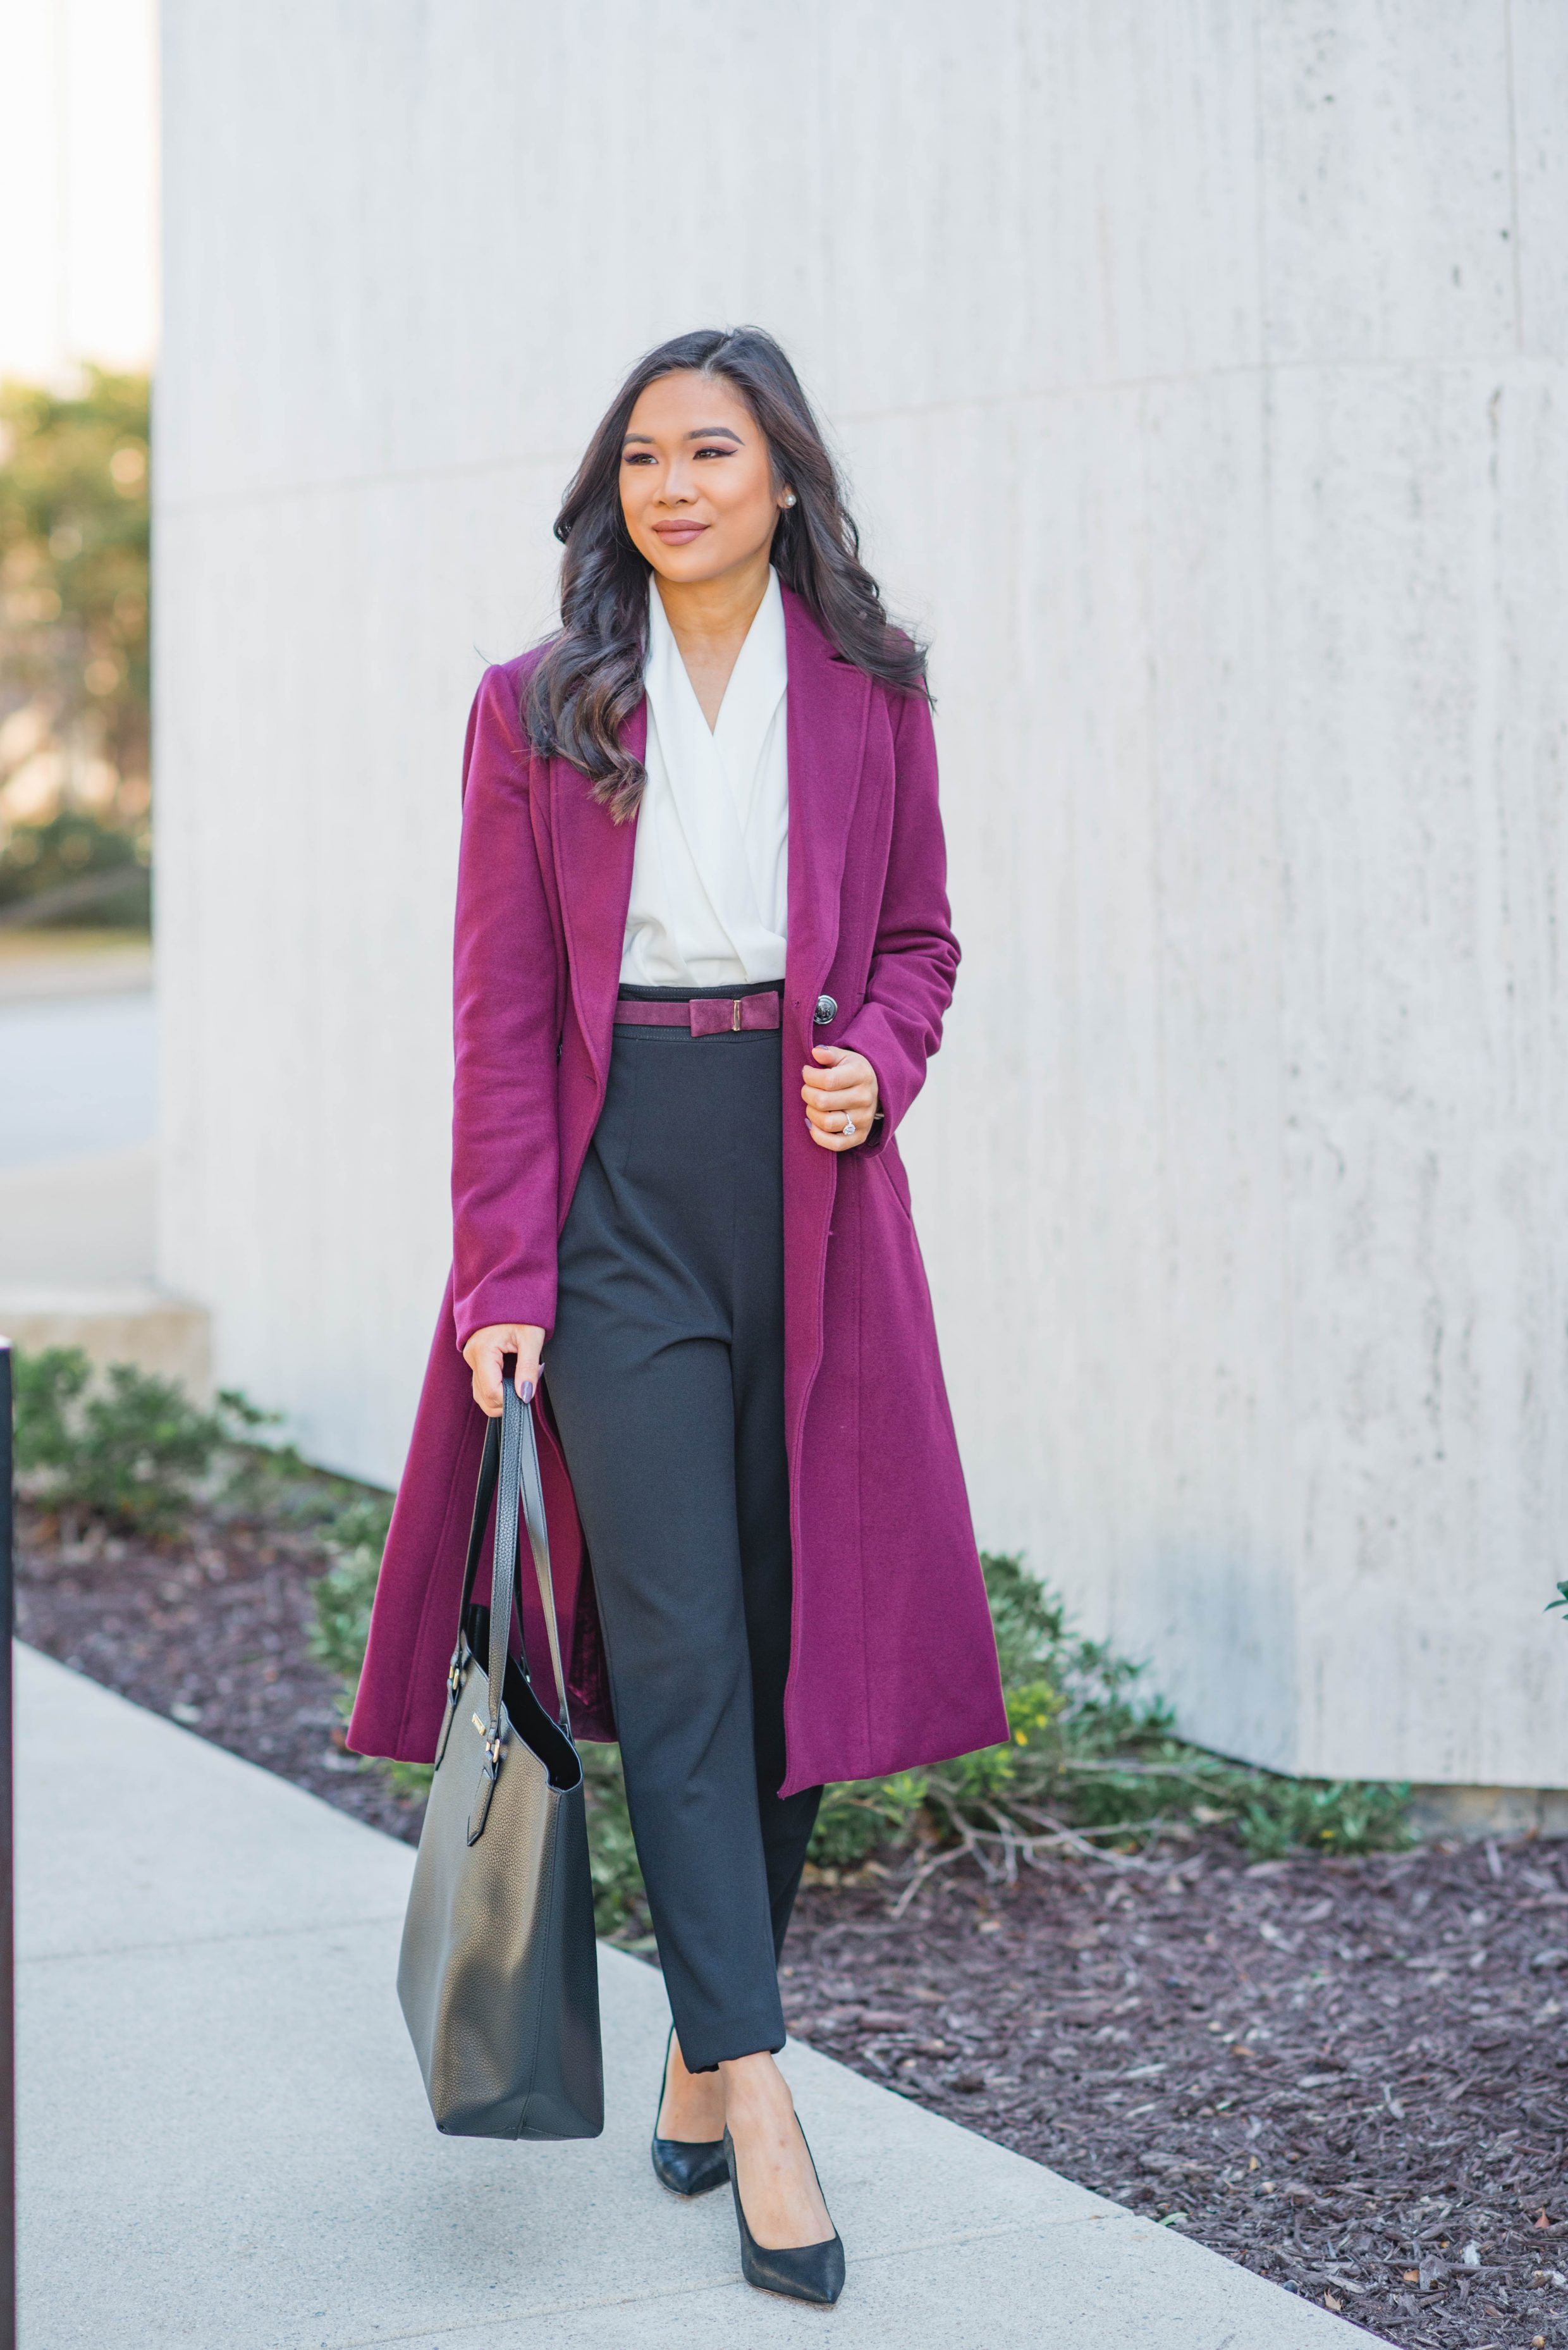 Hoang-Kim wears a contrast jumpsuit with a burgundy coat from desk to drinks